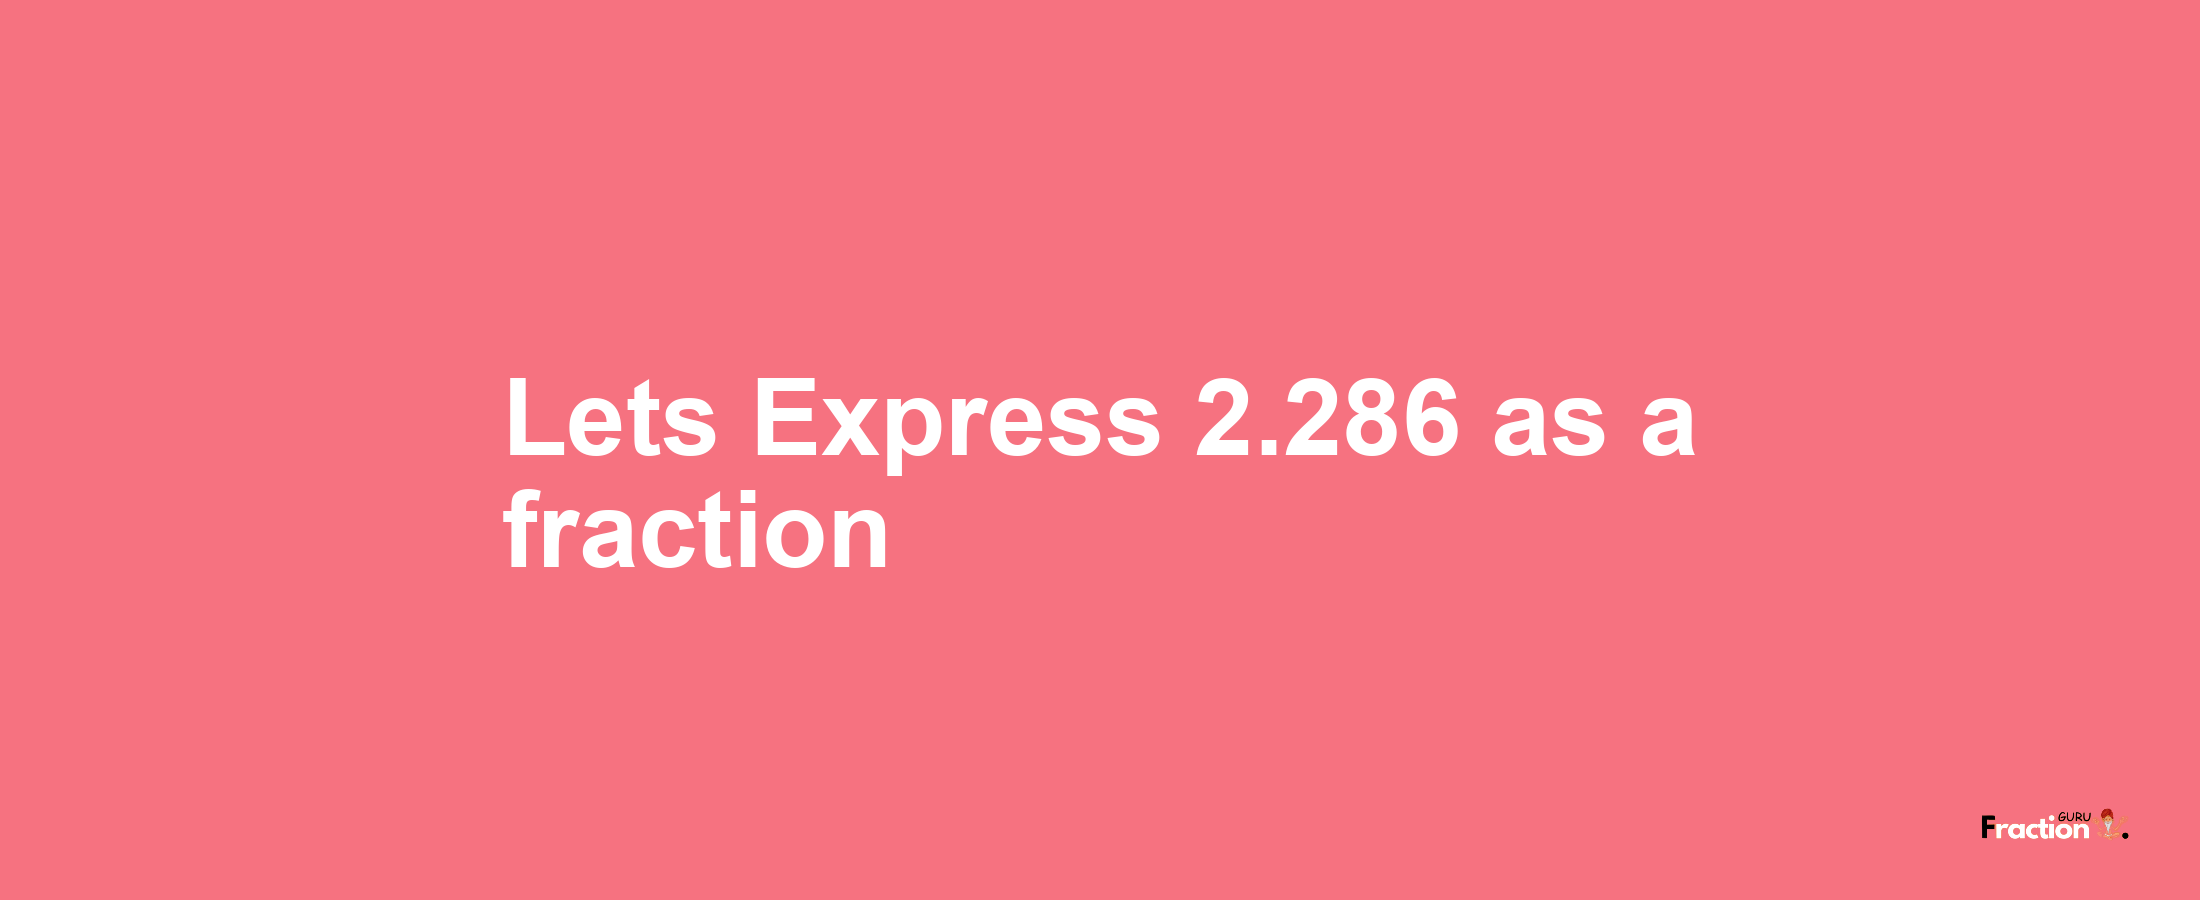 Lets Express 2.286 as afraction